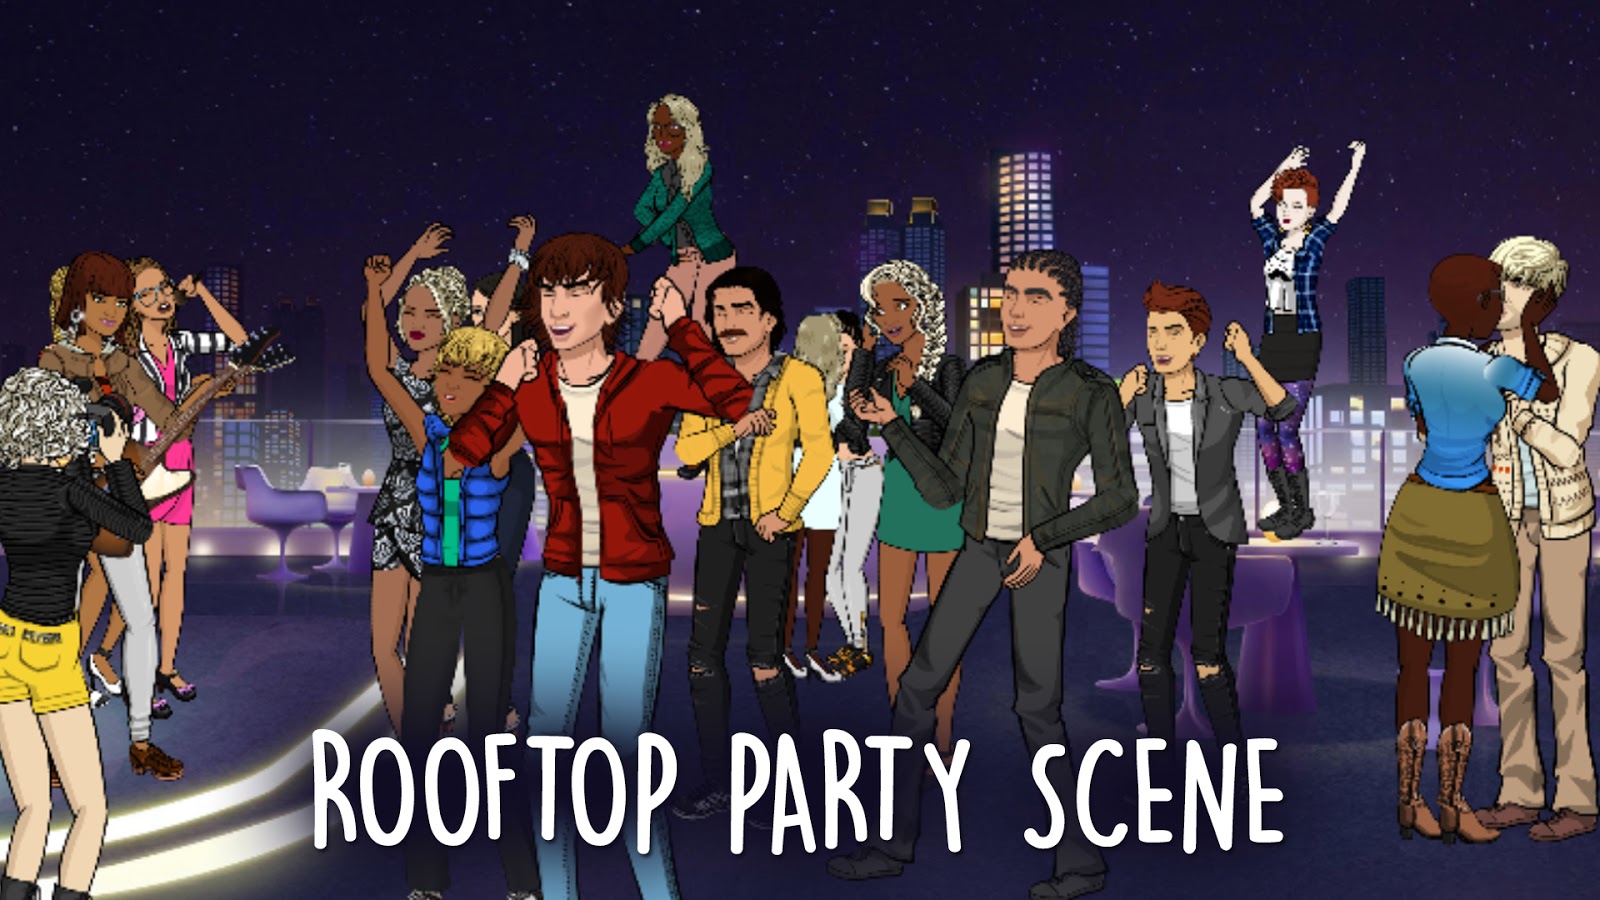 CROWDED ROOFTOP PARTY SCRIPT TEMPLATE